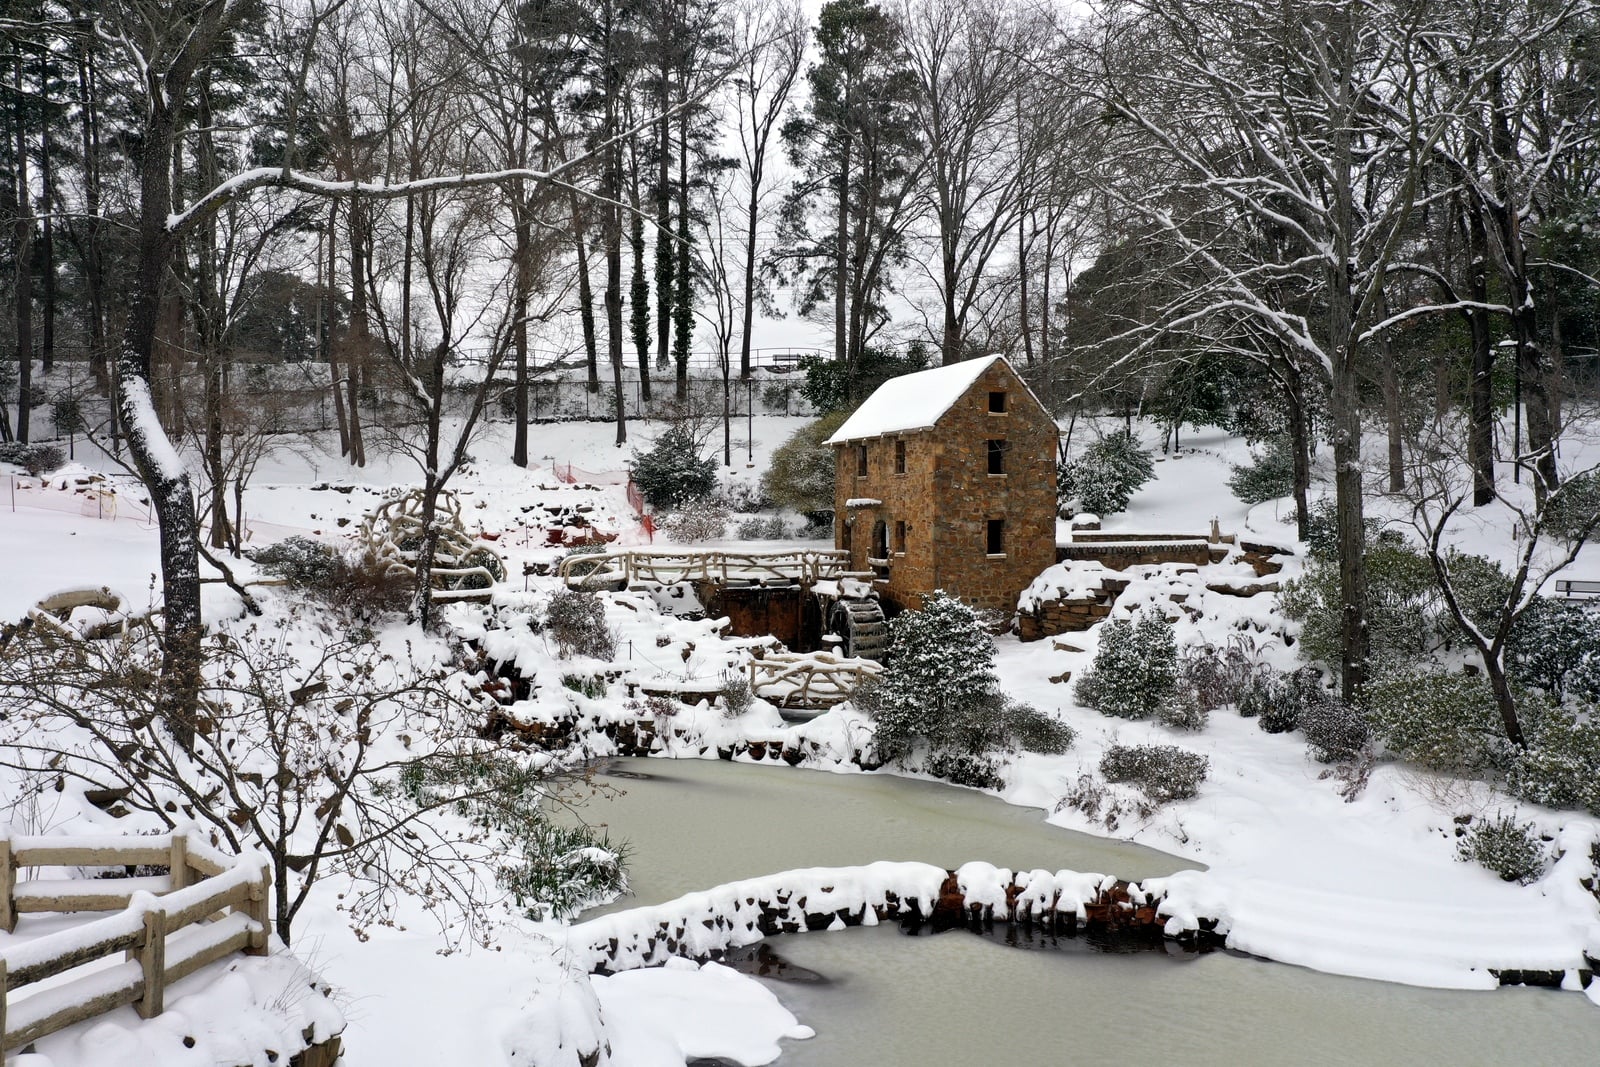 Snow Covered Arkansas Was Magical During The February 21 Storm